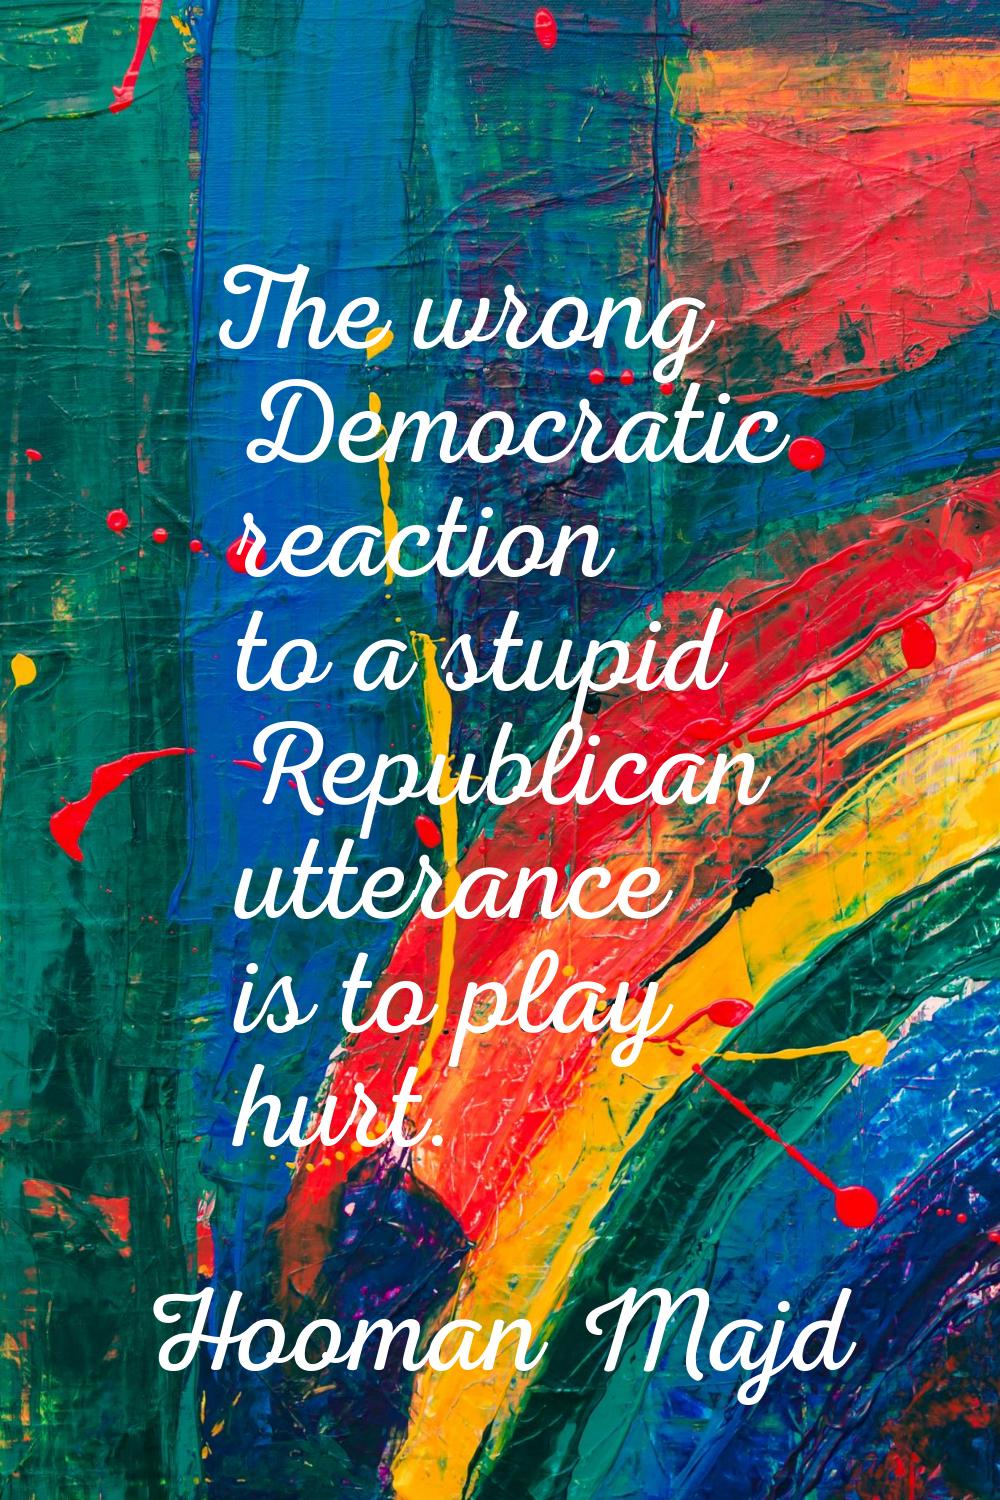 The wrong Democratic reaction to a stupid Republican utterance is to play hurt.